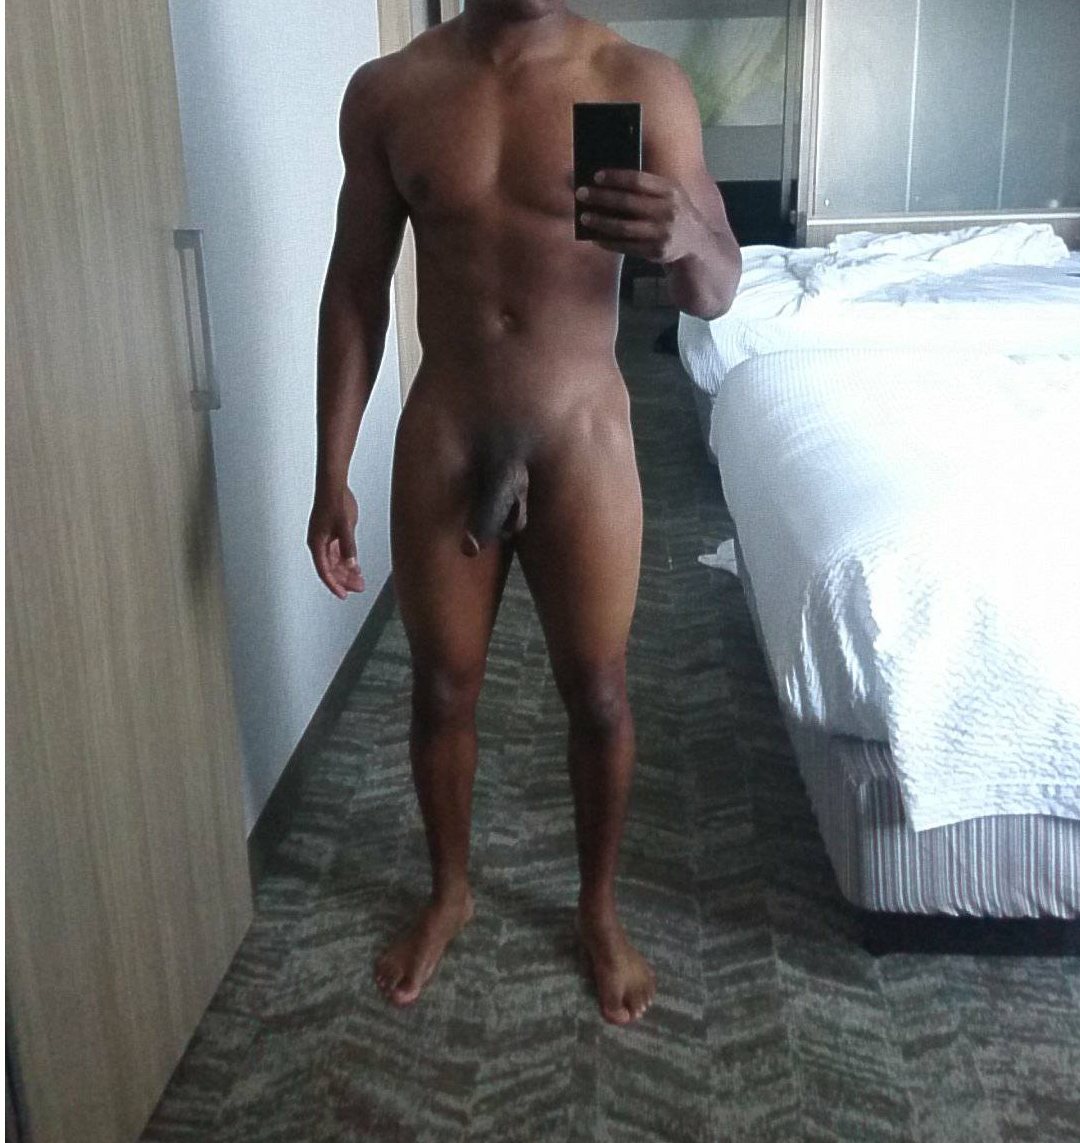 [M] 27, 5'7, 150 lbs, I've gained 40 lbs in the last 2years. Finally beginning to feel comfortable with my body. I still have a long way to go, especially lower body. My goal is to weigh 175-180 by 2020! Also pm me for snapchat name!